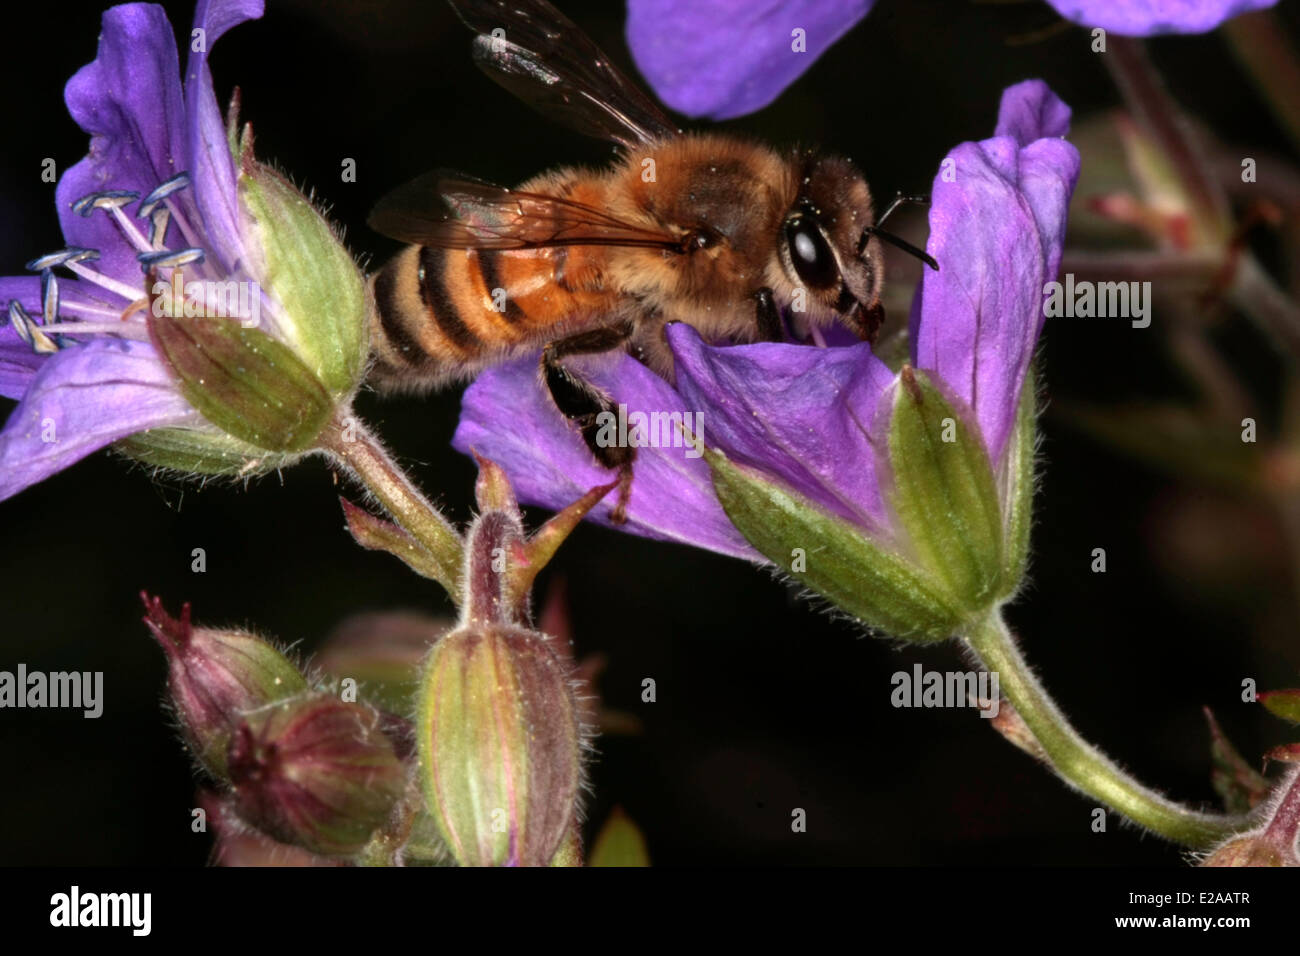 A honeybee is visiting the blossom of Geranium pratense L. The plant offers the honeybees much nectar and proteinrich pollen. Photo: Klaus Nowottnick Date: May 18, 2011 Stock Photo